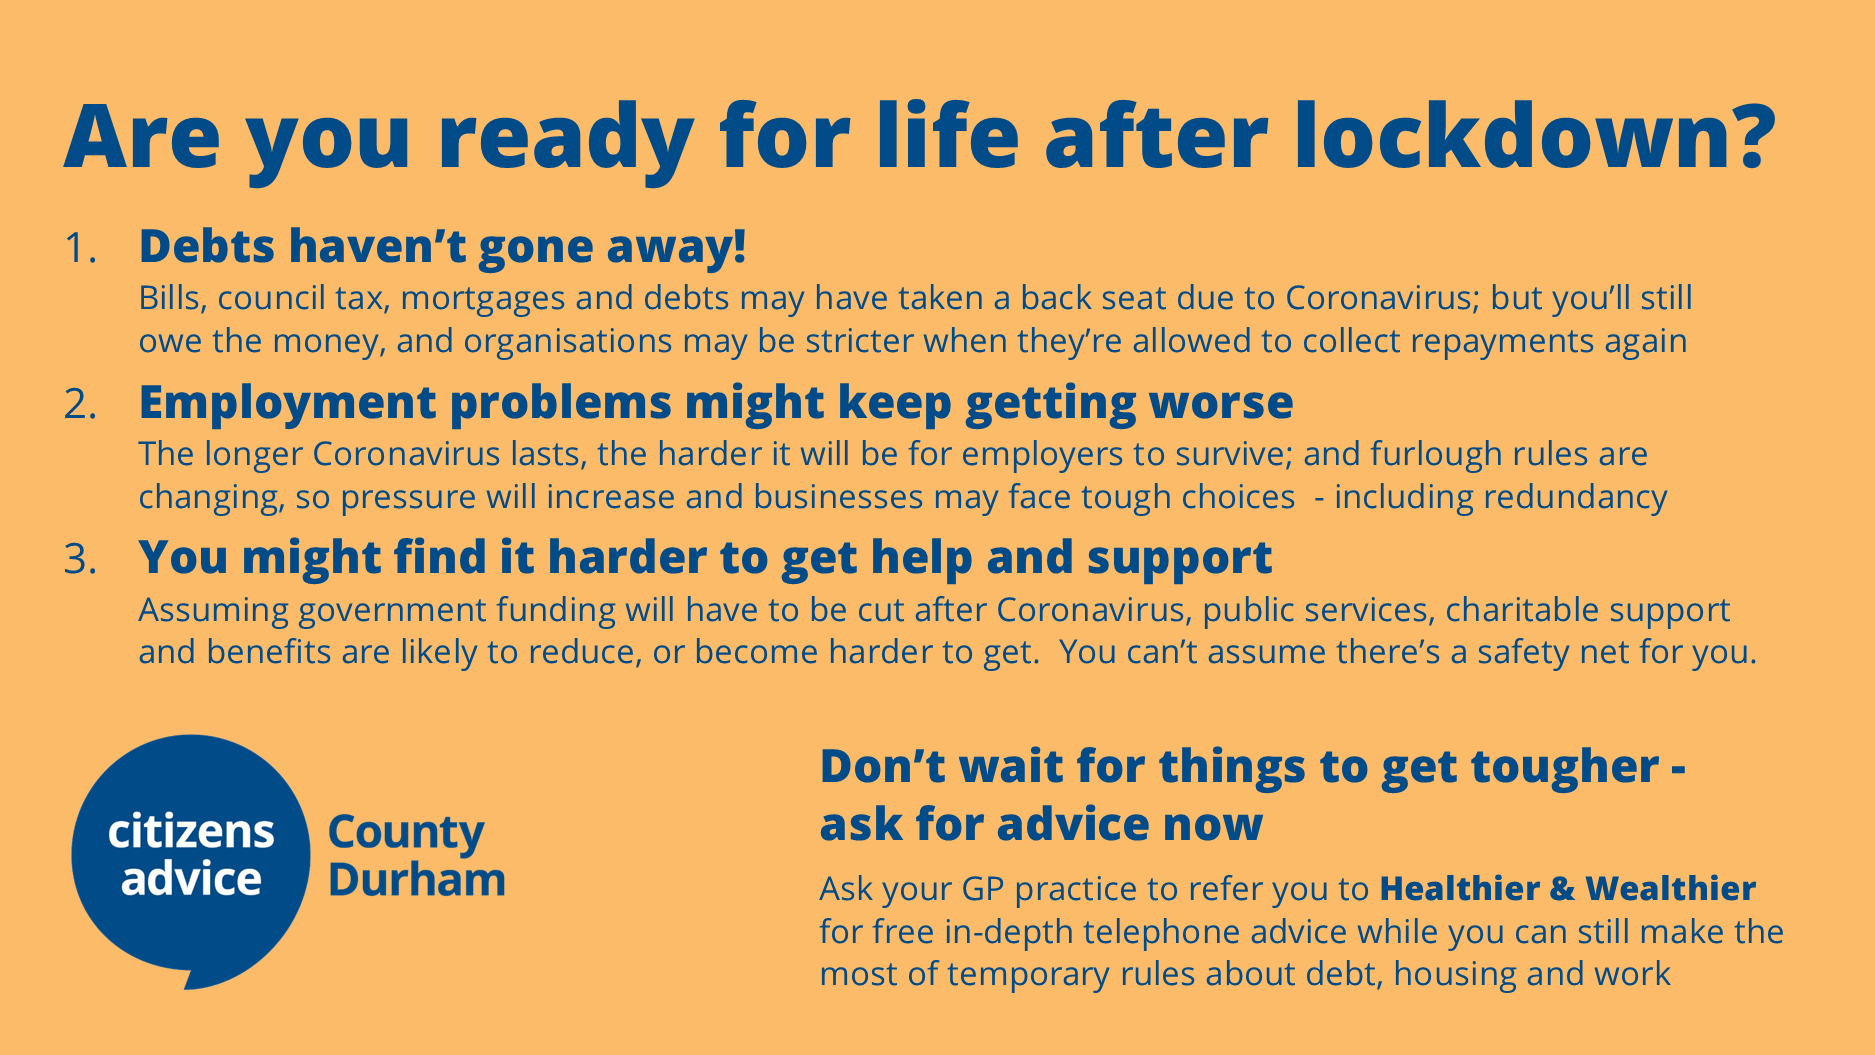 Life after lockdown - Debts, Employment problems, support. If you need advice contact Citizens Advice County Durham